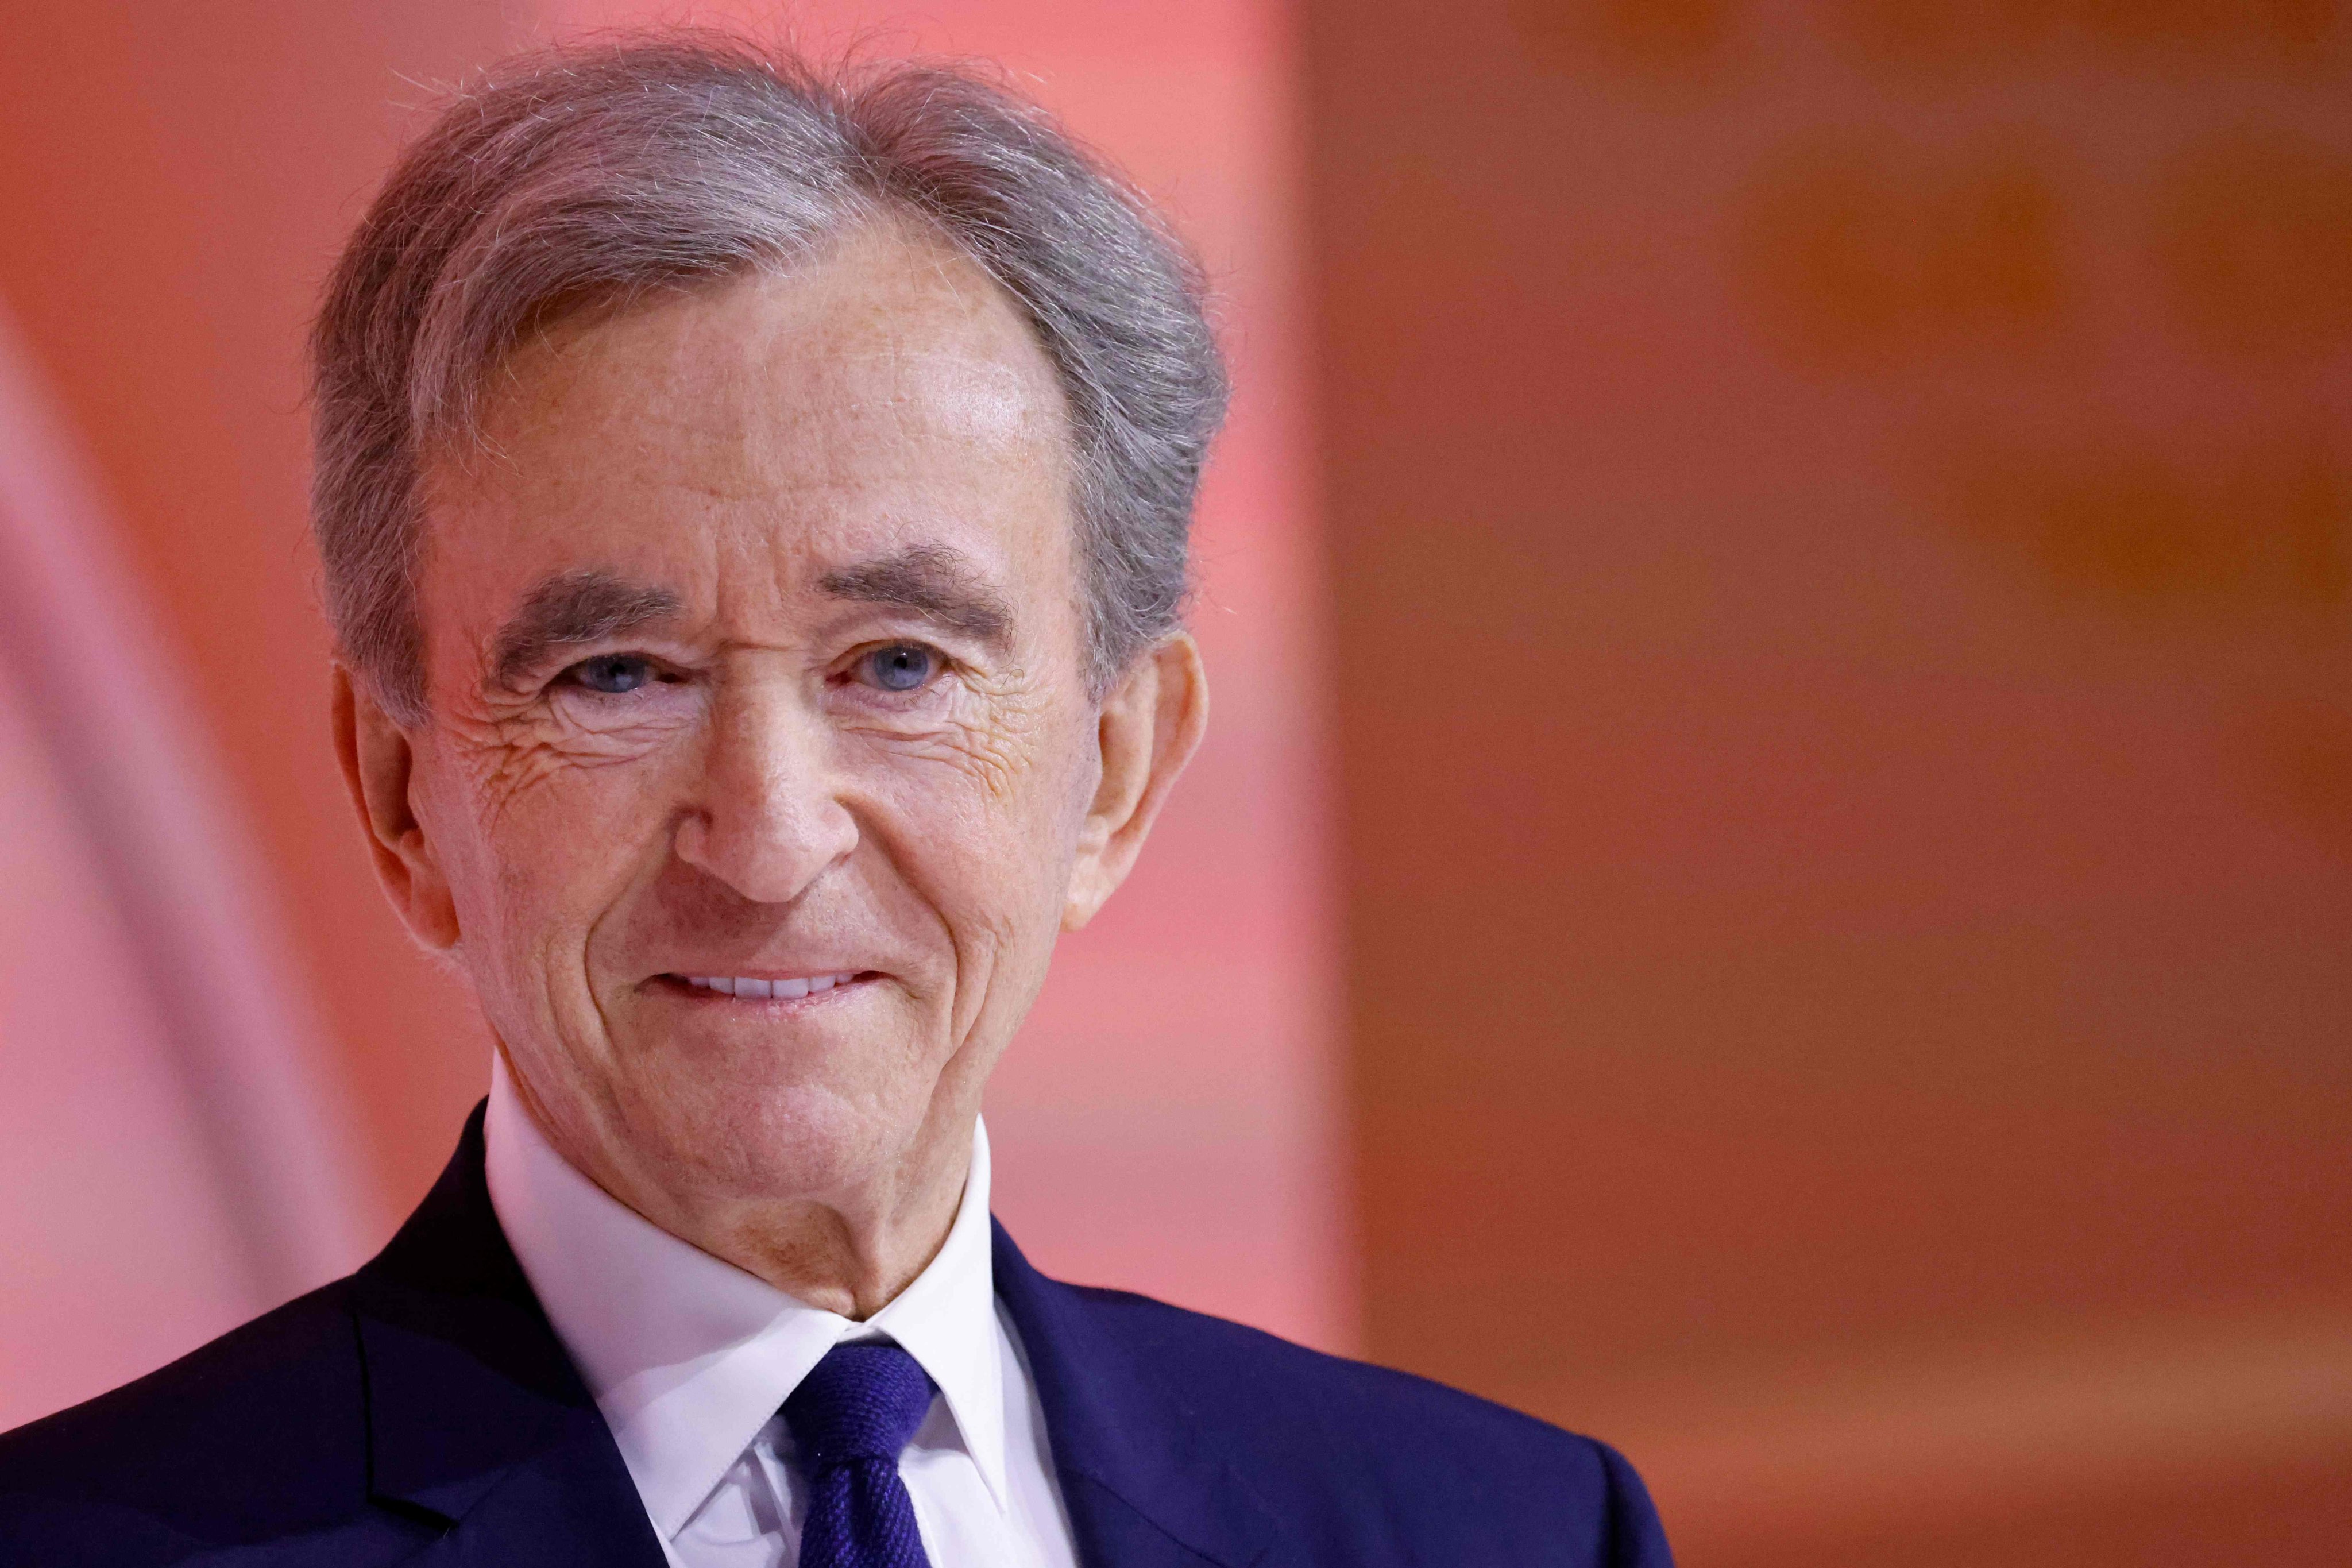 Arnault is being accompanied by Louis Vuitton CEO Pietro Beccari and Delphine, his daughter who heads Christian Dior Couture. Photo: AFP